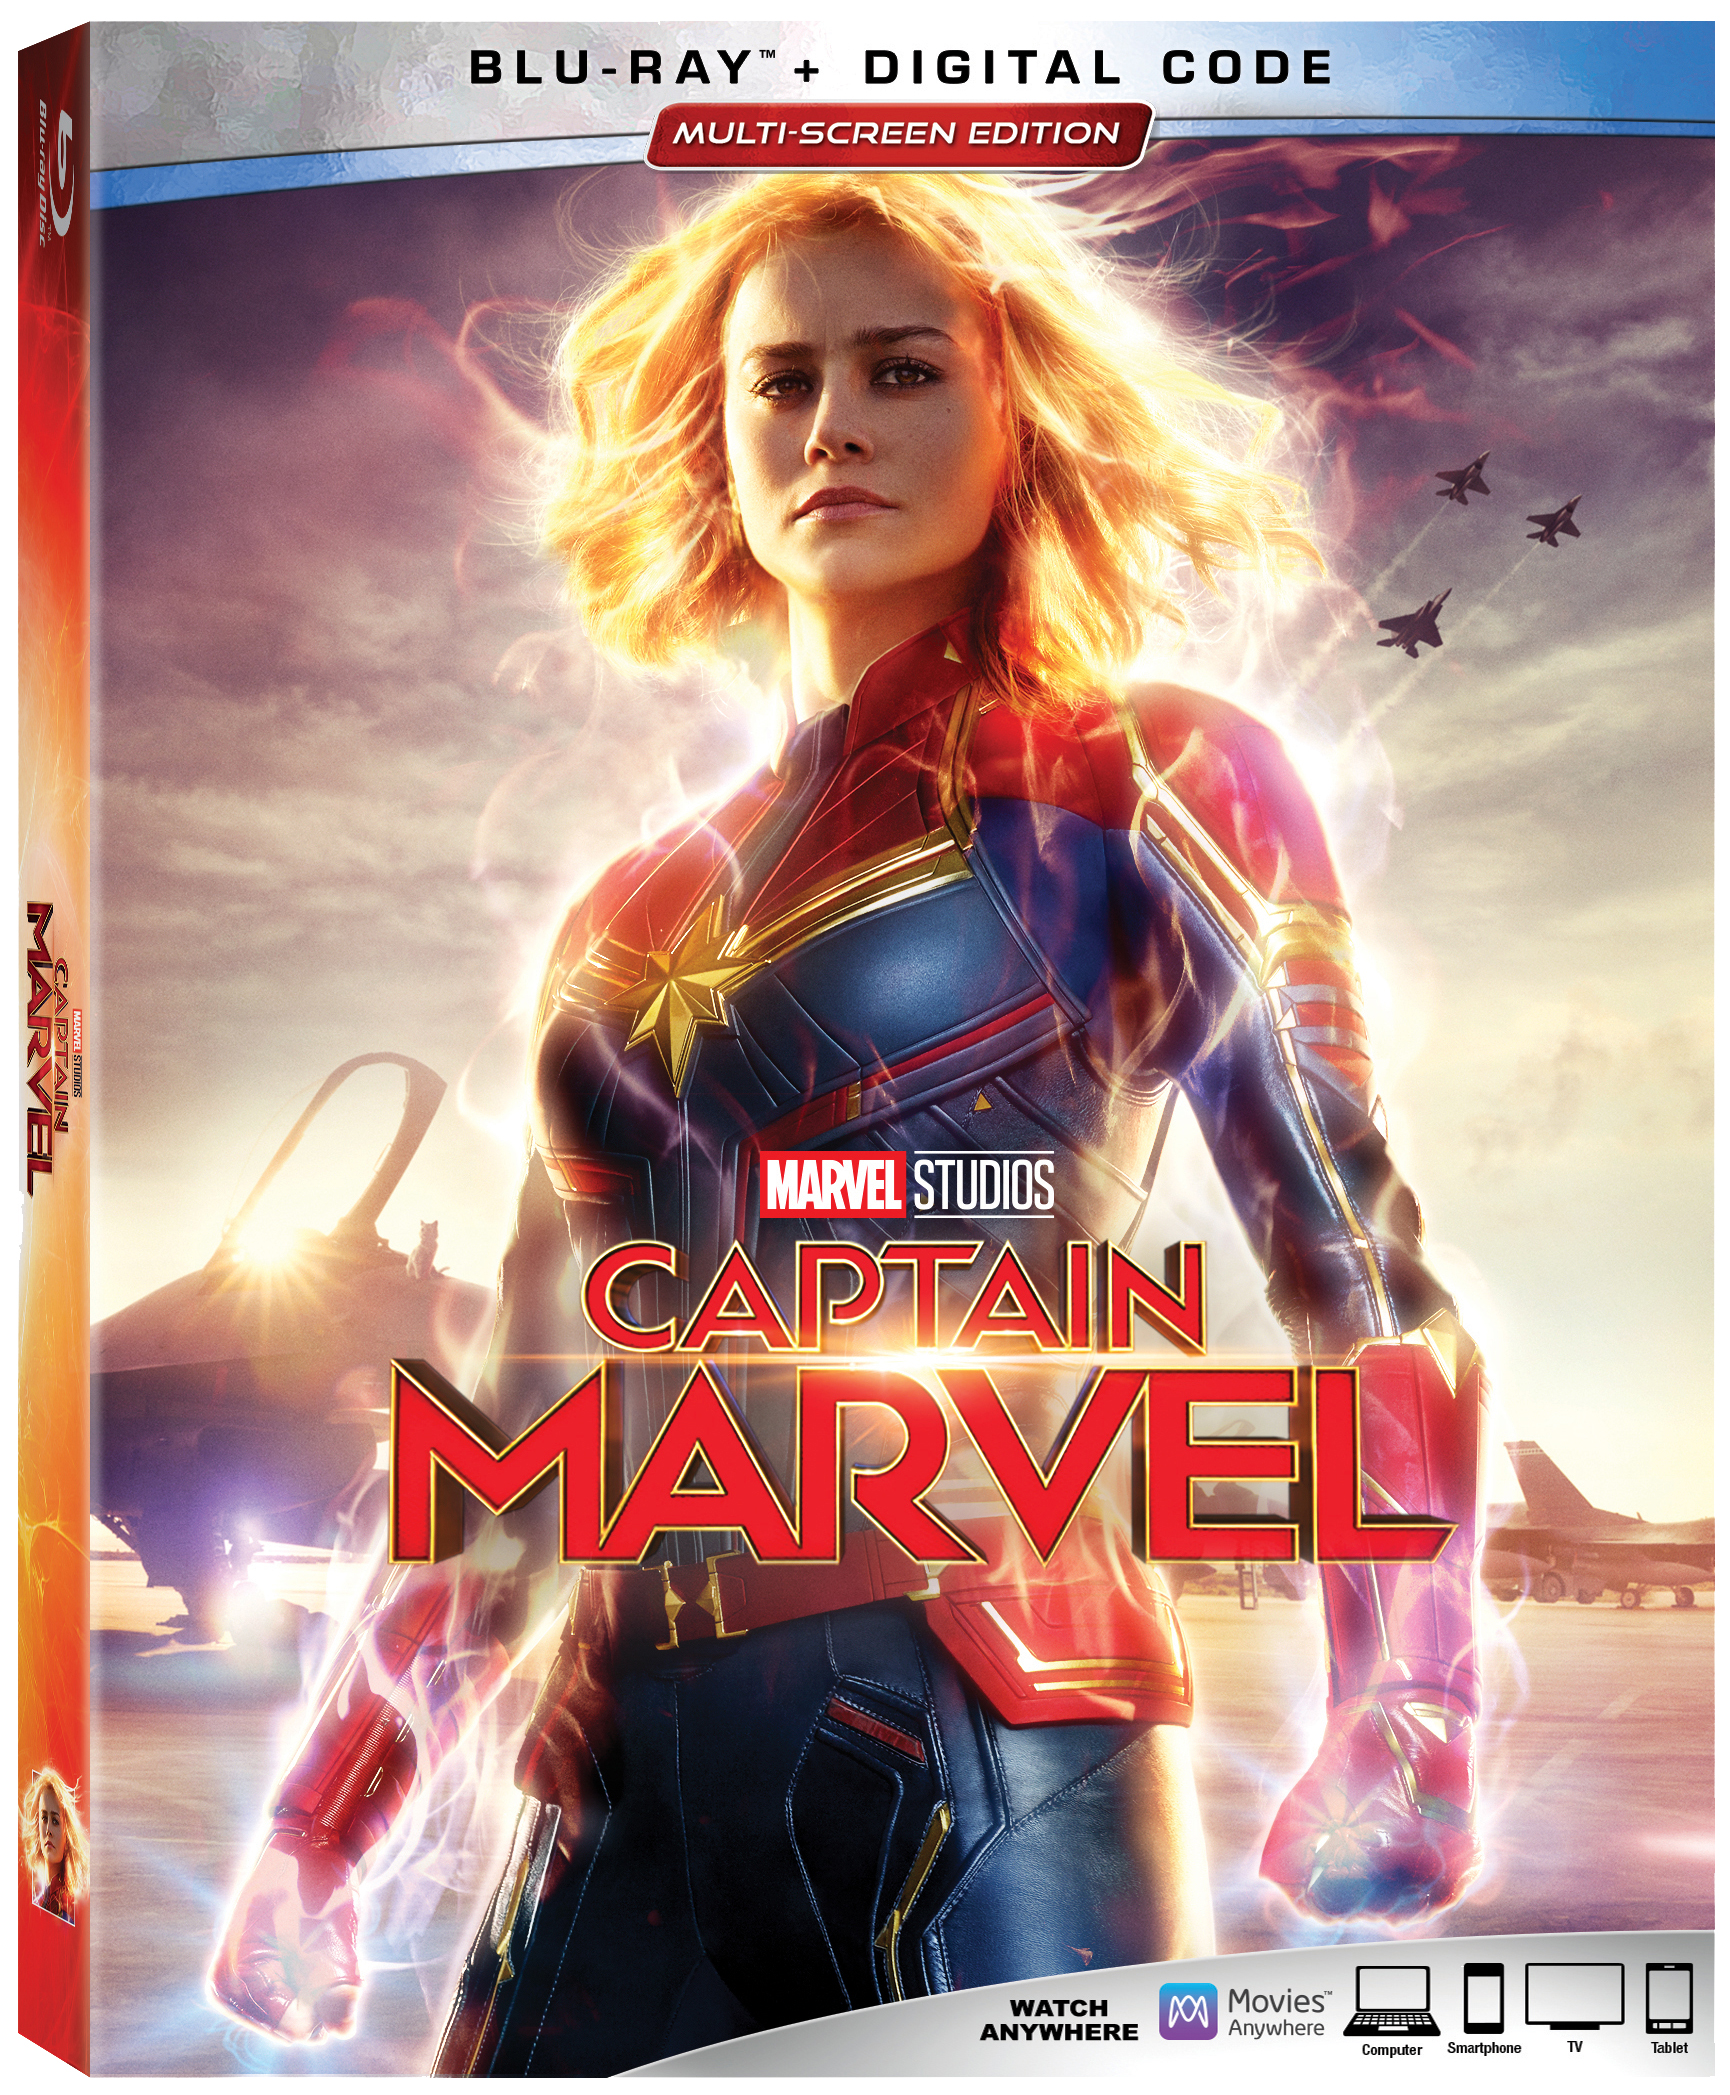 The cover art for Captain Marvel on blu-ray.